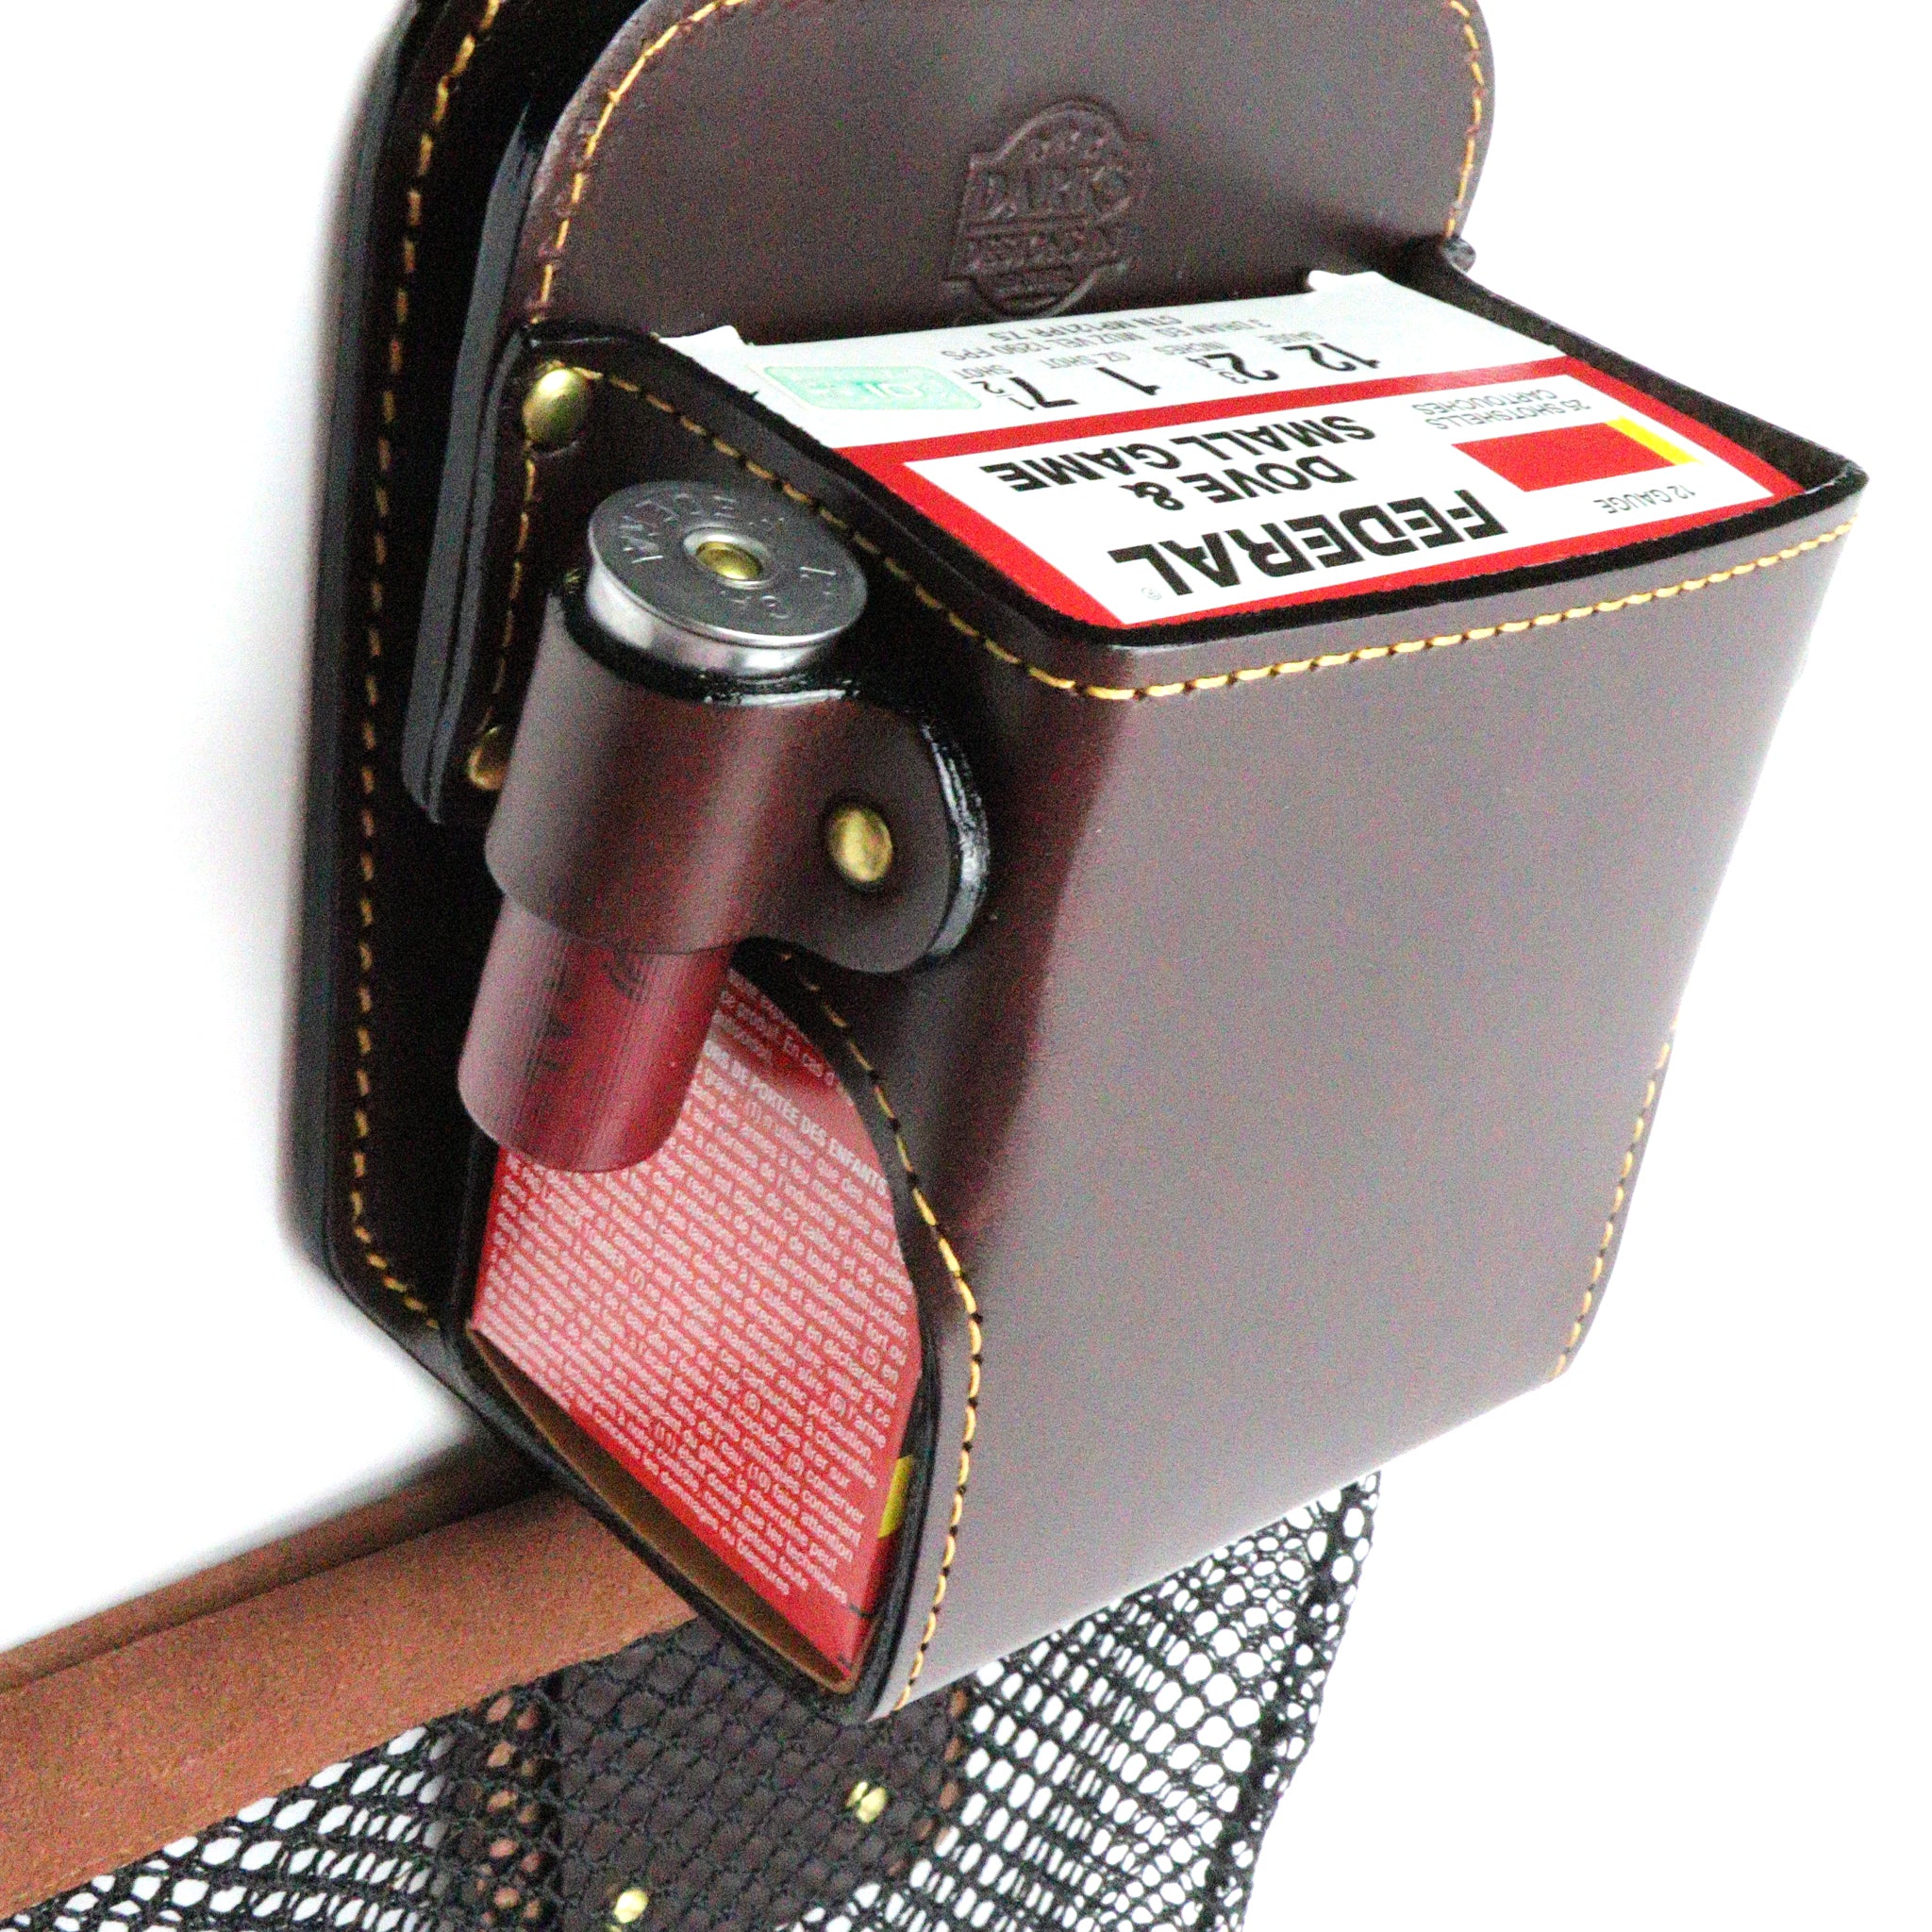 Dark's Leather - "The Rig" Shotgun Shell Case in Bridle Leather, Detail